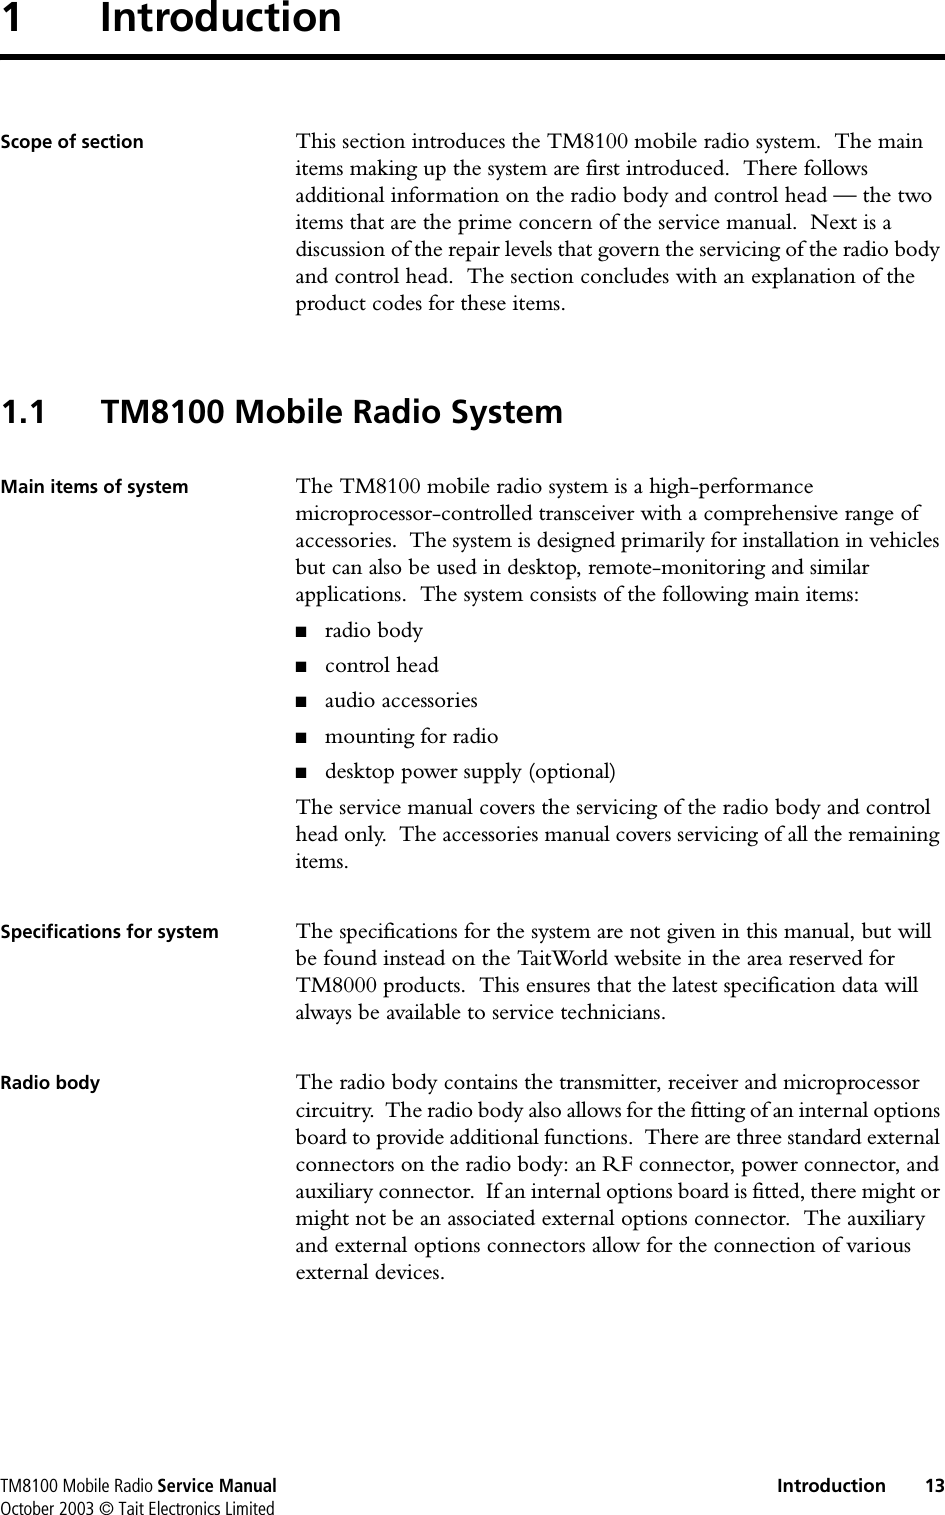 TM8100 Mobile Radio Service Manual Introduction 13October 2003 © Tait Electronics Limited1 IntroductionScope of section This section introduces the TM8100 mobile radio system.  The main items making up the system are first introduced.  There follows additional information on the radio body and control head — the two items that are the prime concern of the service manual.  Next is a discussion of the repair levels that govern the servicing of the radio body and control head.  The section concludes with an explanation of the product codes for these items.1.1 TM8100 Mobile Radio SystemMain items of system The TM8100 mobile radio system is a high-performance microprocessor-controlled transceiver with a comprehensive range of accessories.  The system is designed primarily for installation in vehicles but can also be used in desktop, remote-monitoring and similar applications.  The system consists of the following main items:■radio body■control head■audio accessories■mounting for radio■desktop power supply (optional)The service manual covers the servicing of the radio body and control head only.  The accessories manual covers servicing of all the remaining items.Specifications for system The specifications for the system are not given in this manual, but will be found instead on the TaitWorld website in the area reserved for TM8000 products.  This ensures that the latest specification data will always be available to service technicians.Radio body The radio body contains the transmitter, receiver and microprocessor circuitry.  The radio body also allows for the fitting of an internal options board to provide additional functions.  There are three standard external connectors on the radio body: an RF connector, power connector, and auxiliary connector.  If an internal options board is fitted, there might or might not be an associated external options connector.  The auxiliary and external options connectors allow for the connection of various external devices.